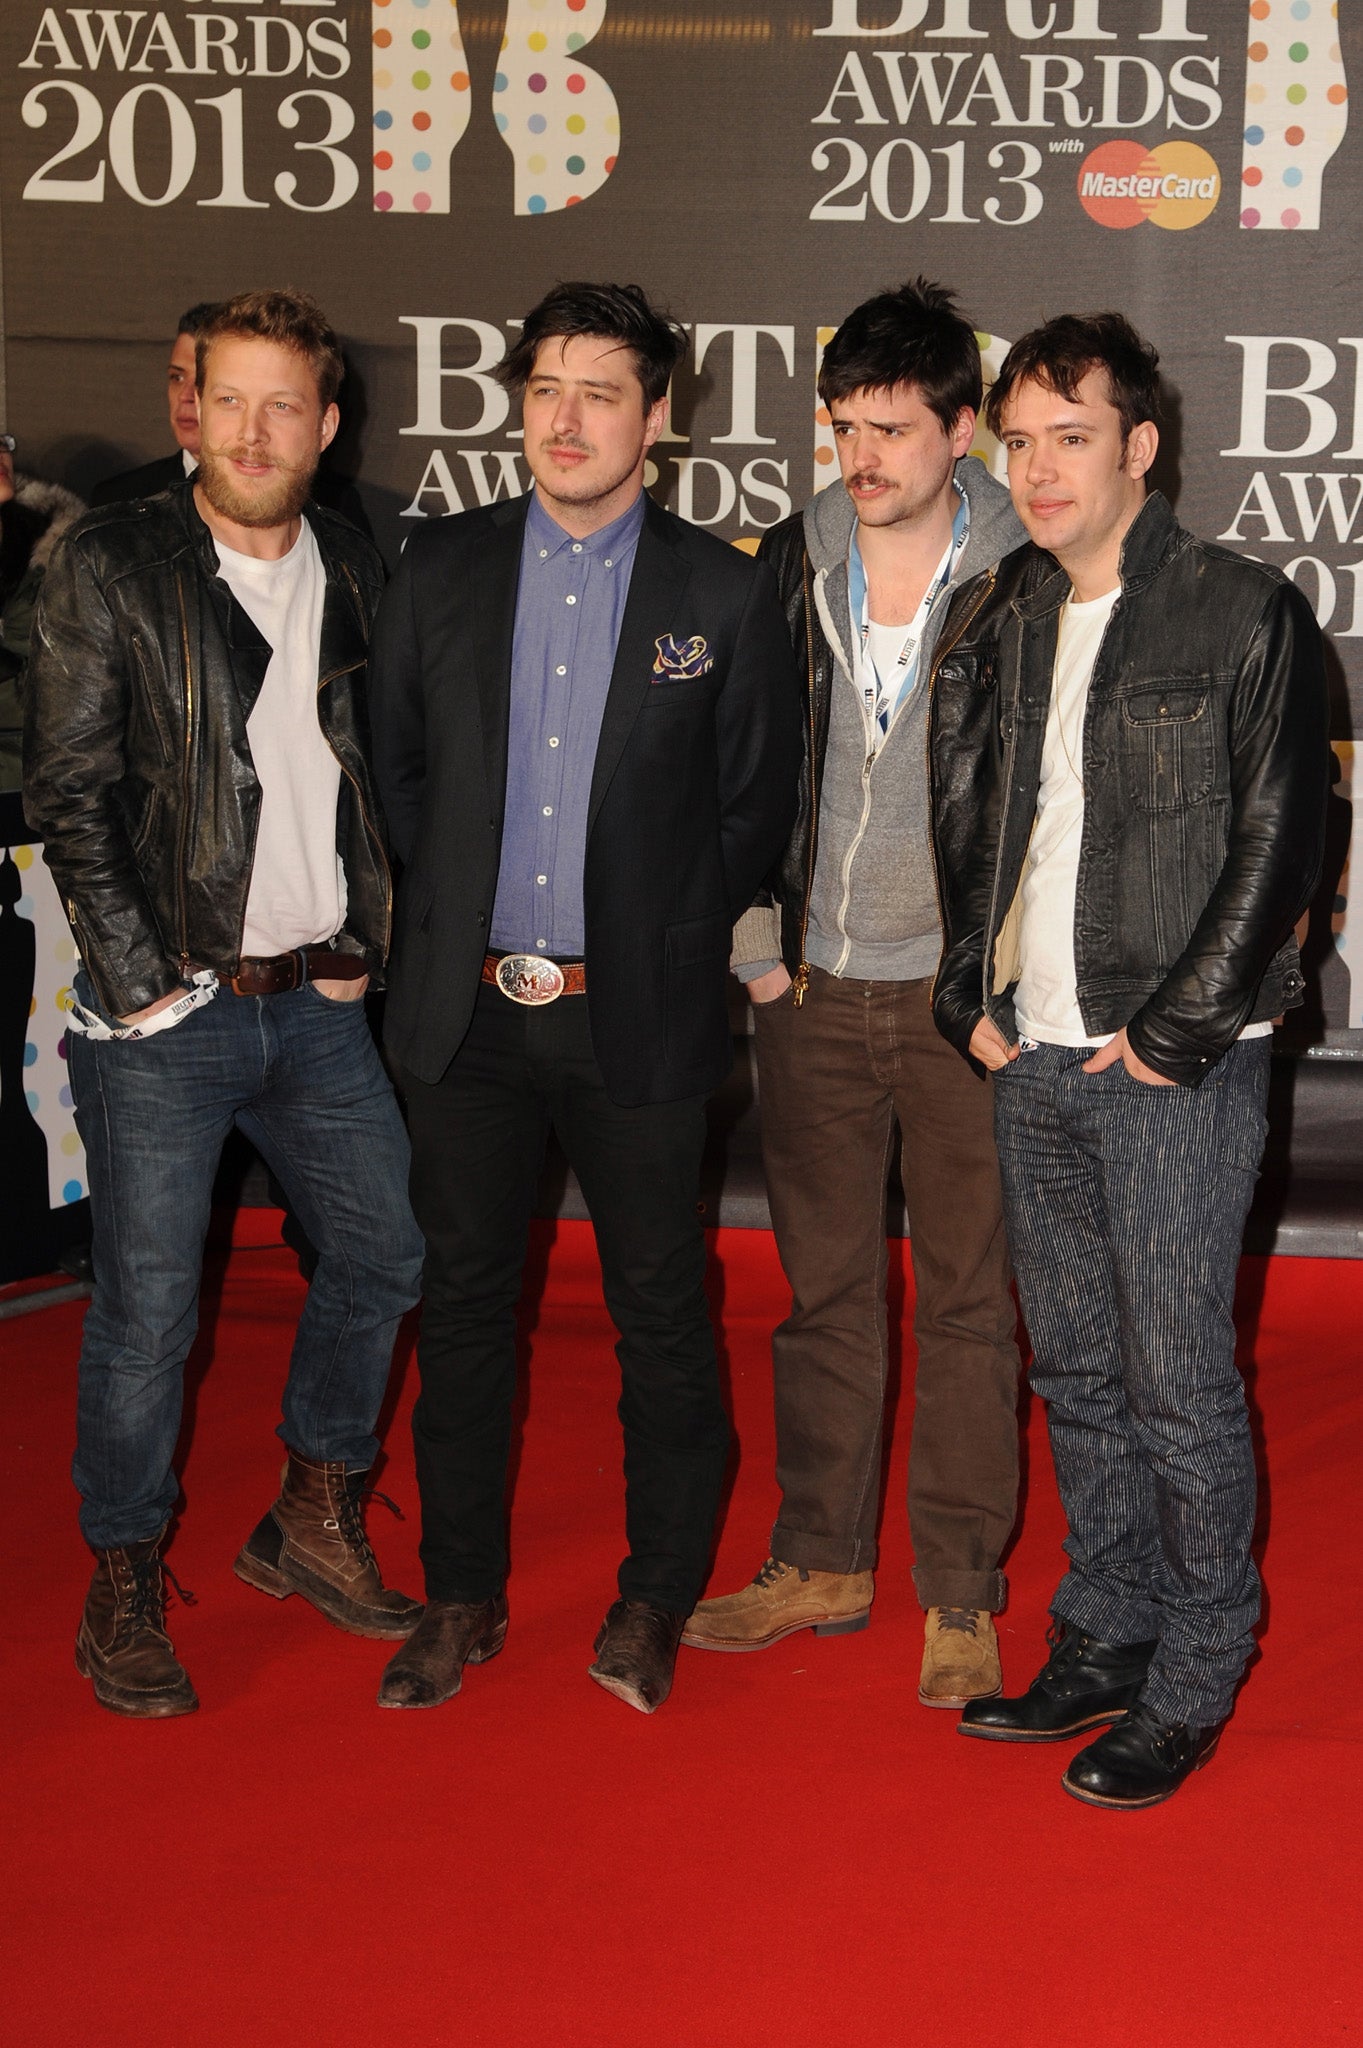 Ted Dwane, Marcus Mumford, Winston-Marshall and Ben Lovett of Mumford & Sons attend the Brit Awards 2013 at the 02 Arena